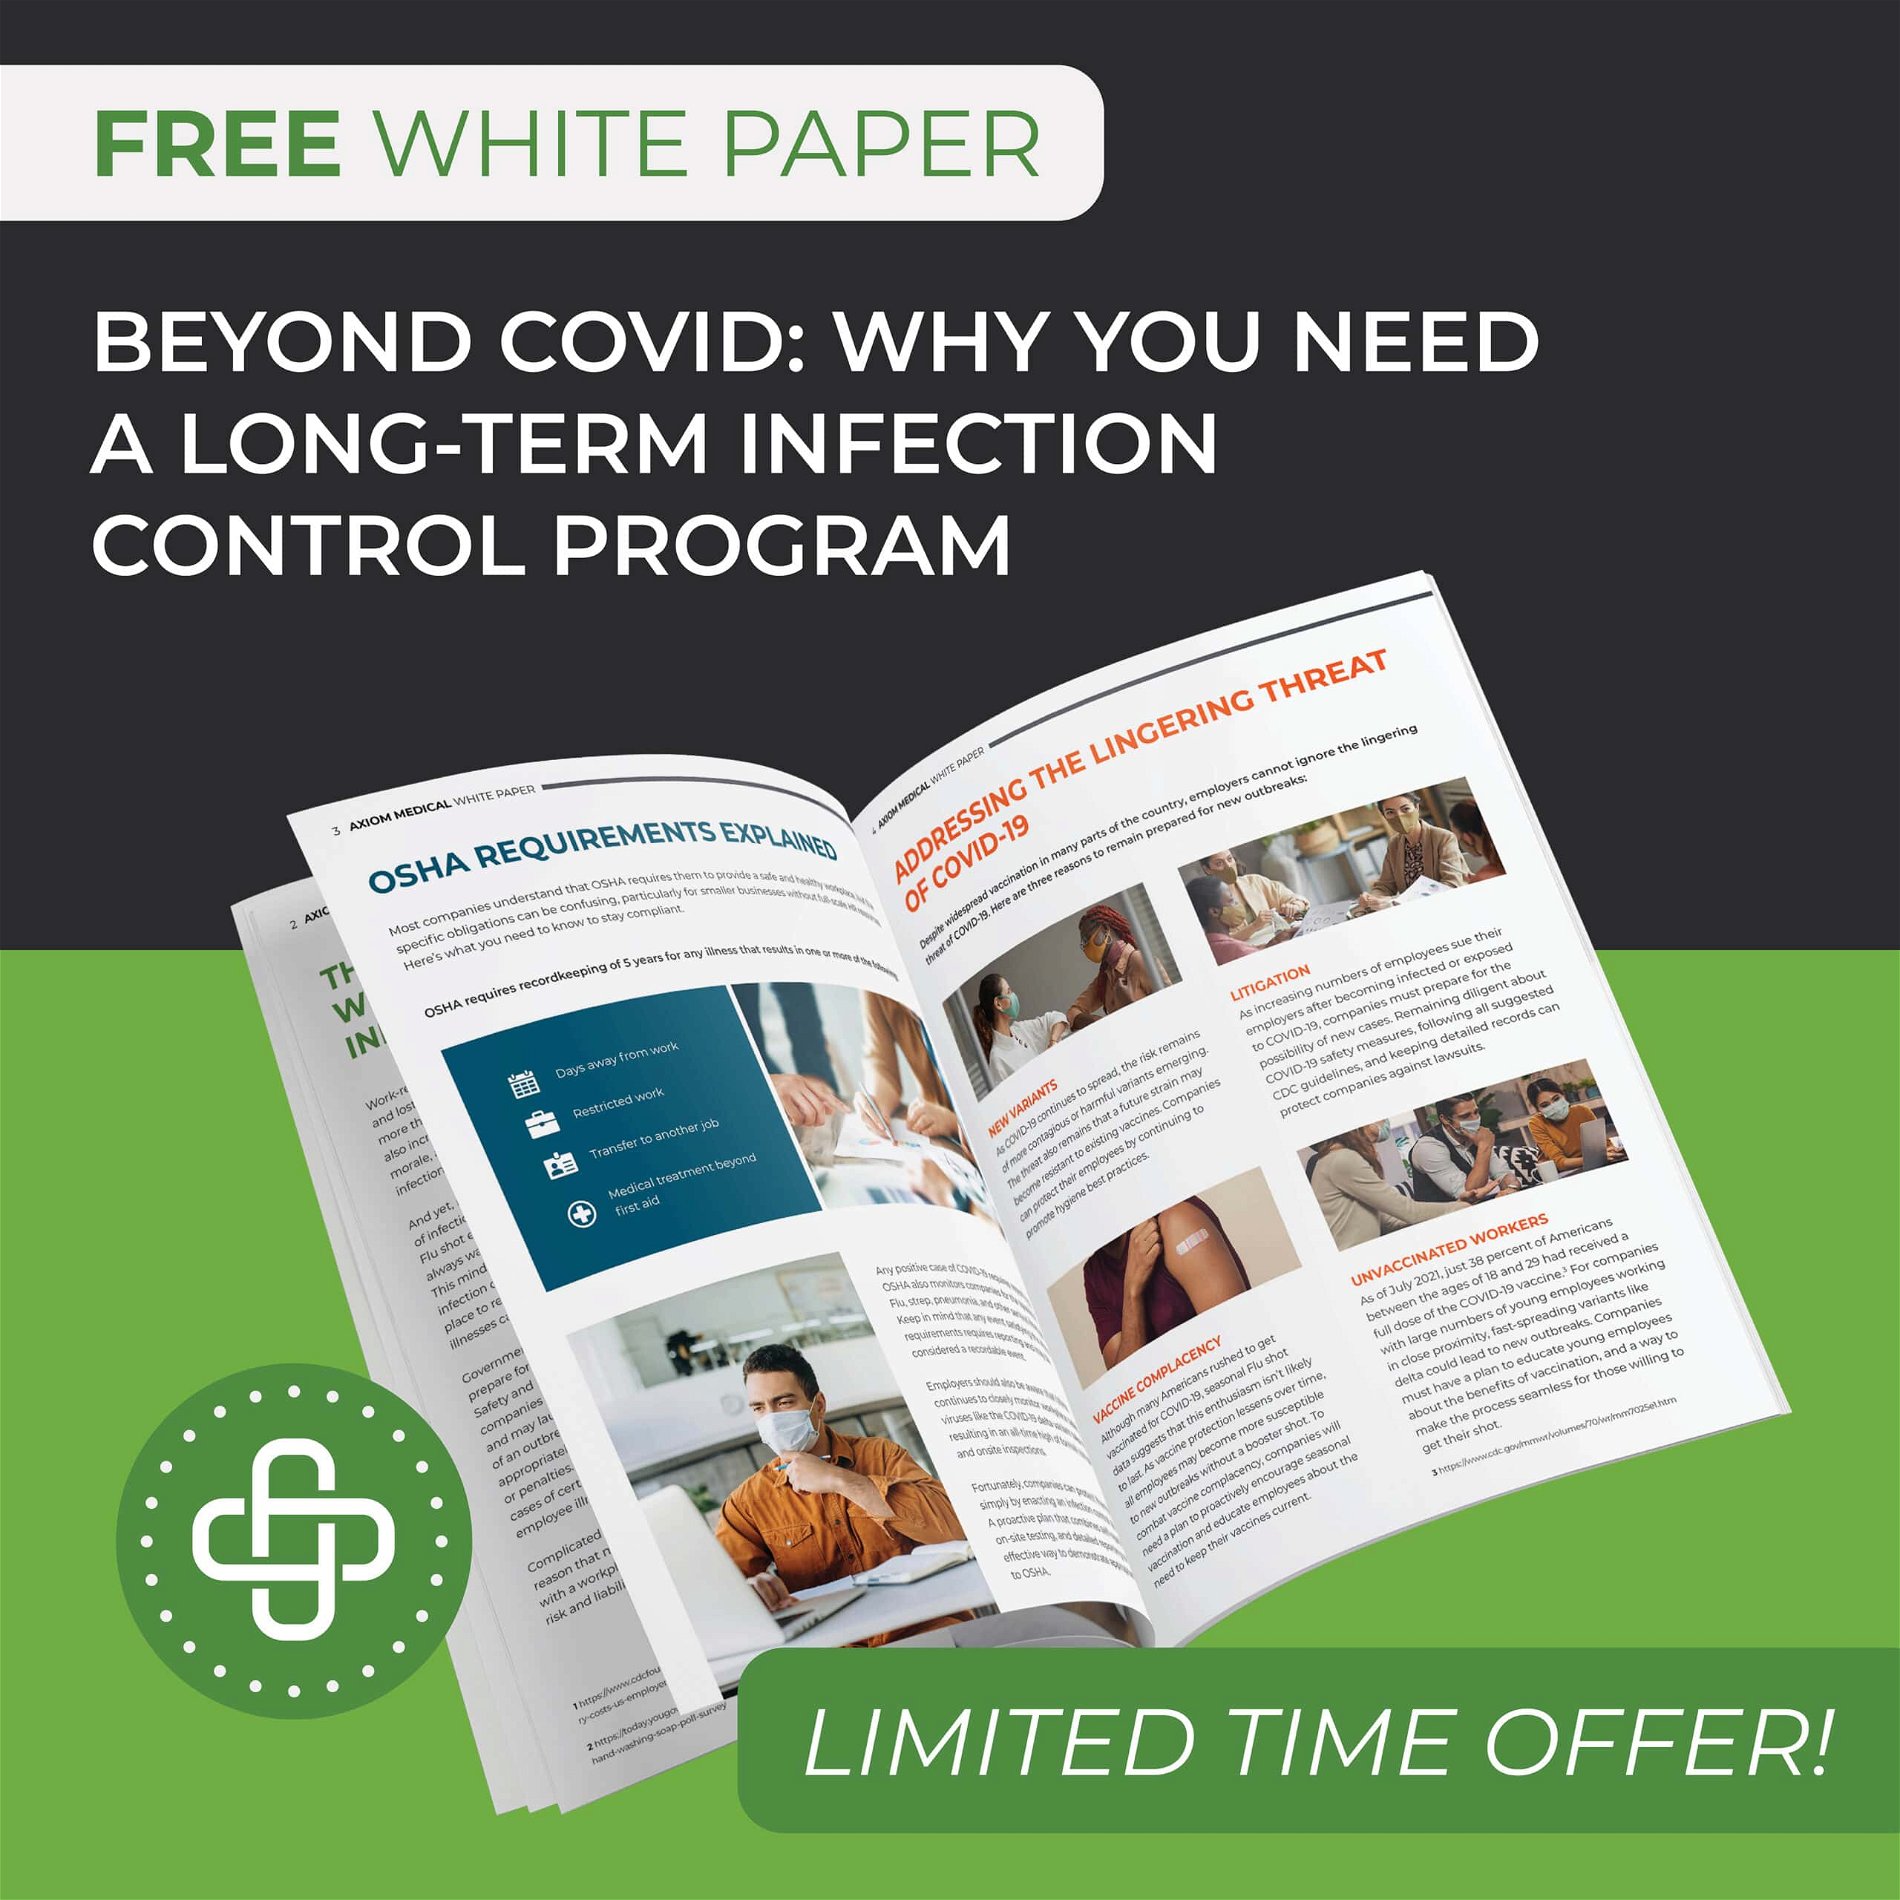 beyond-covid-infection control program